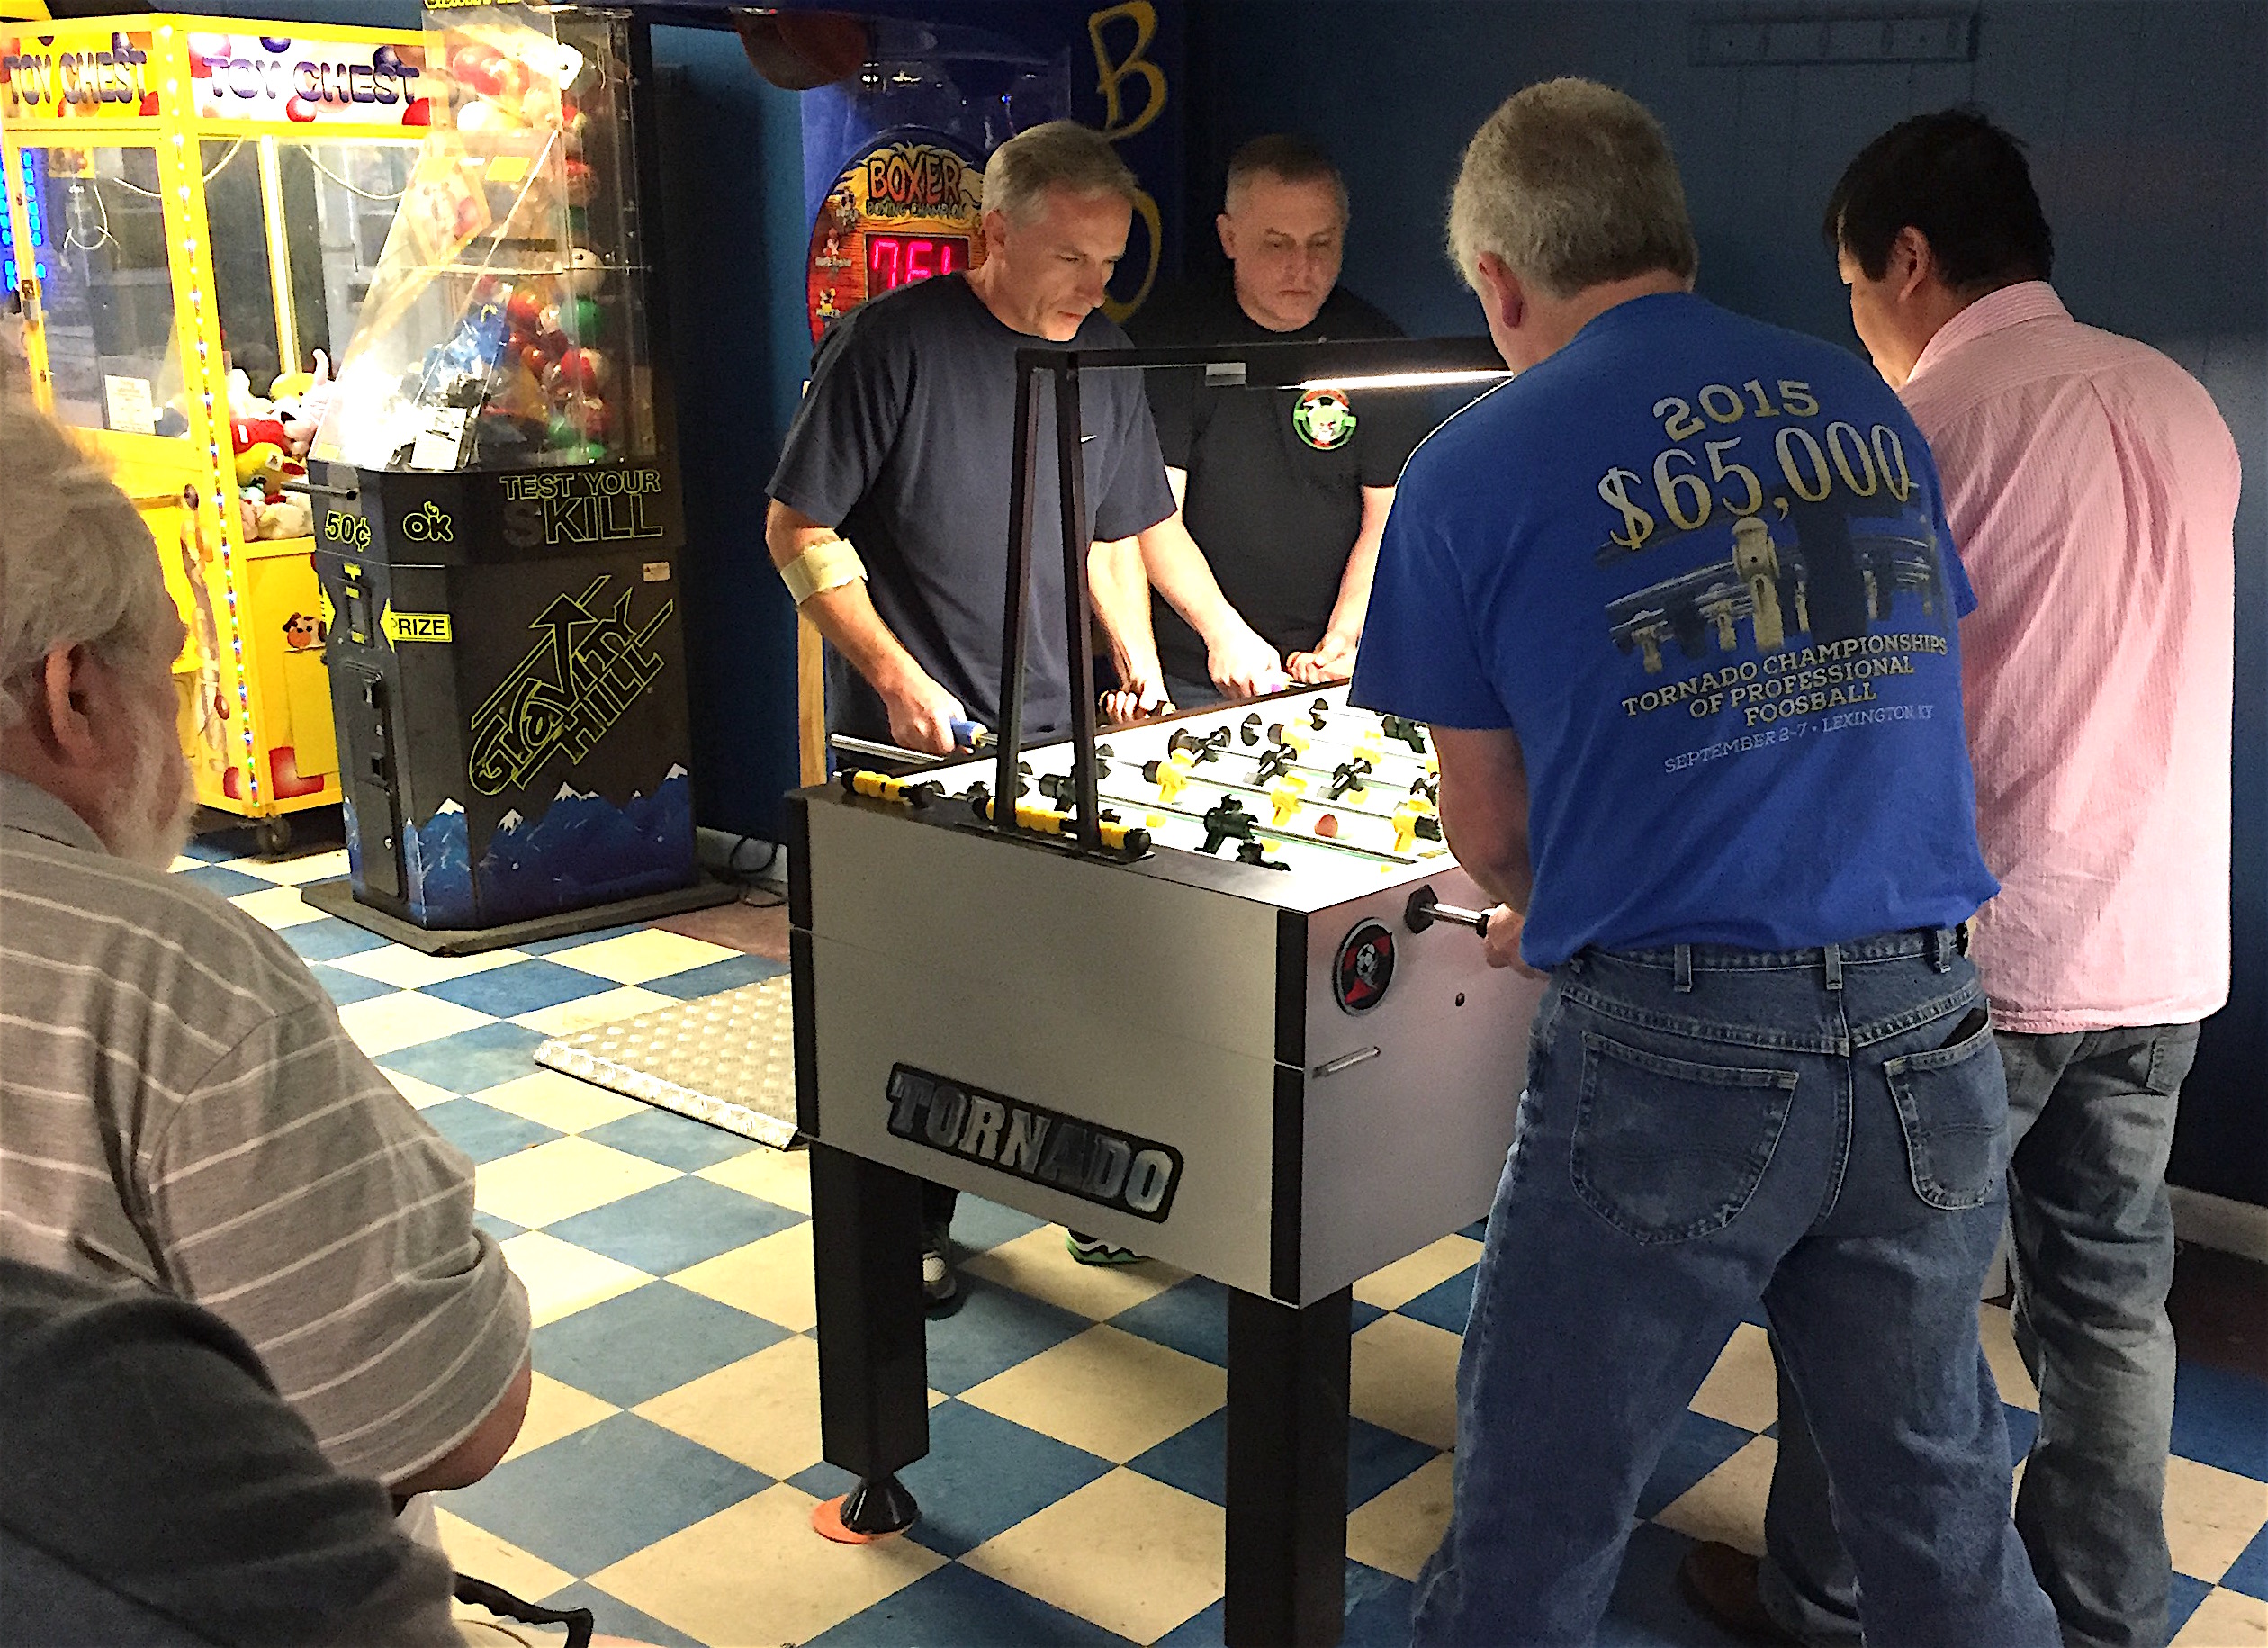 Foosball players competing in Cullman at the North Alabama Open foosball tournament.